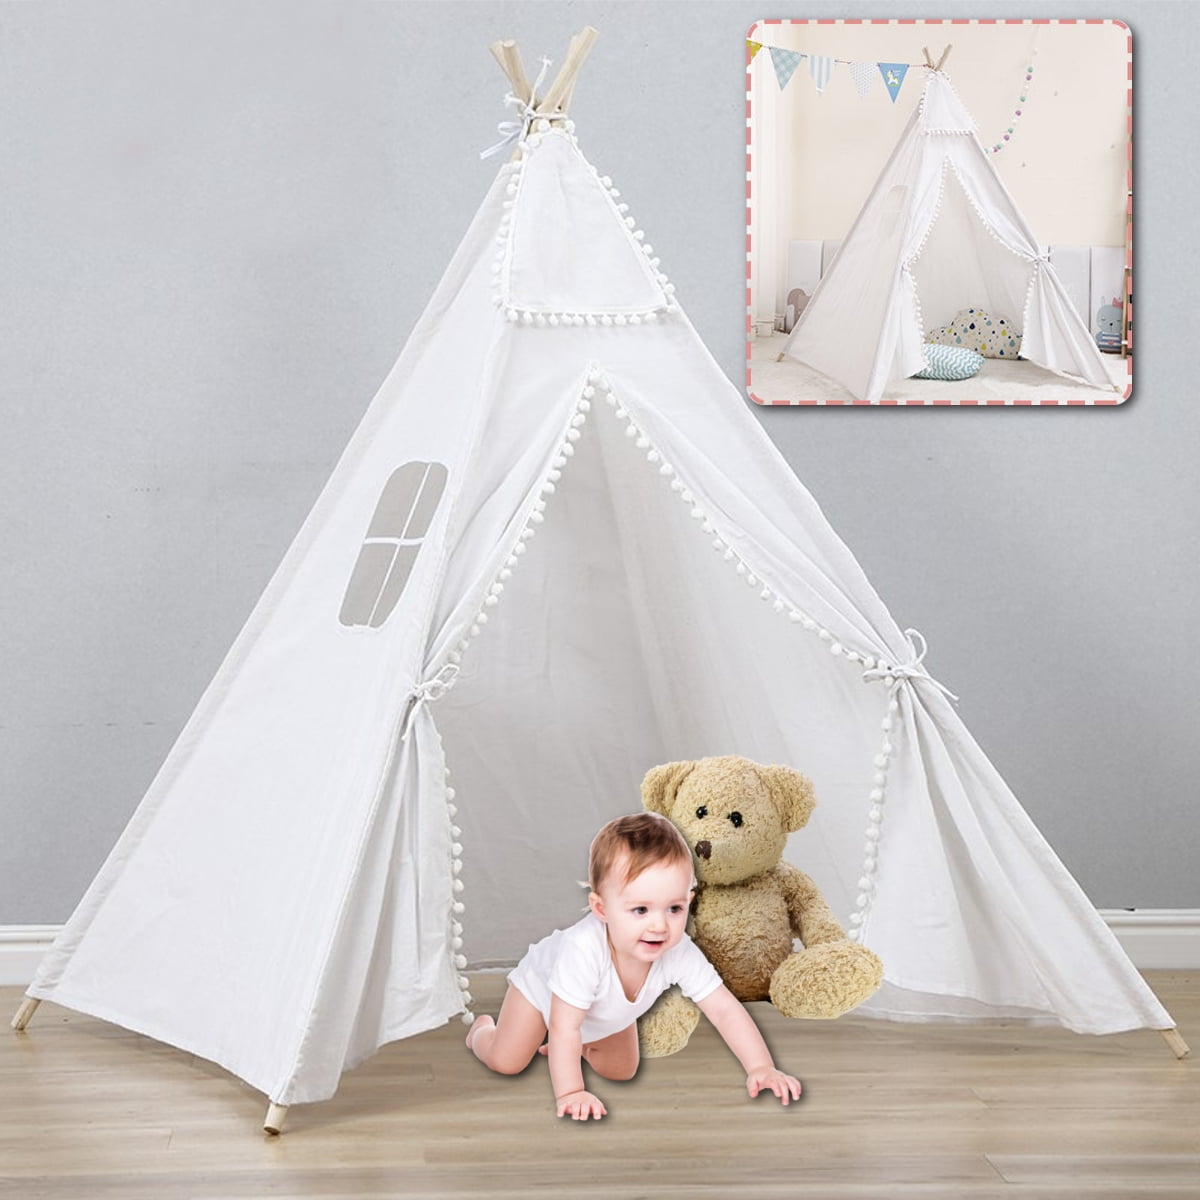 Details about   Kids Teepee Tent with Mat & Light String& Carry Case Kids Foldable Play Tent... 